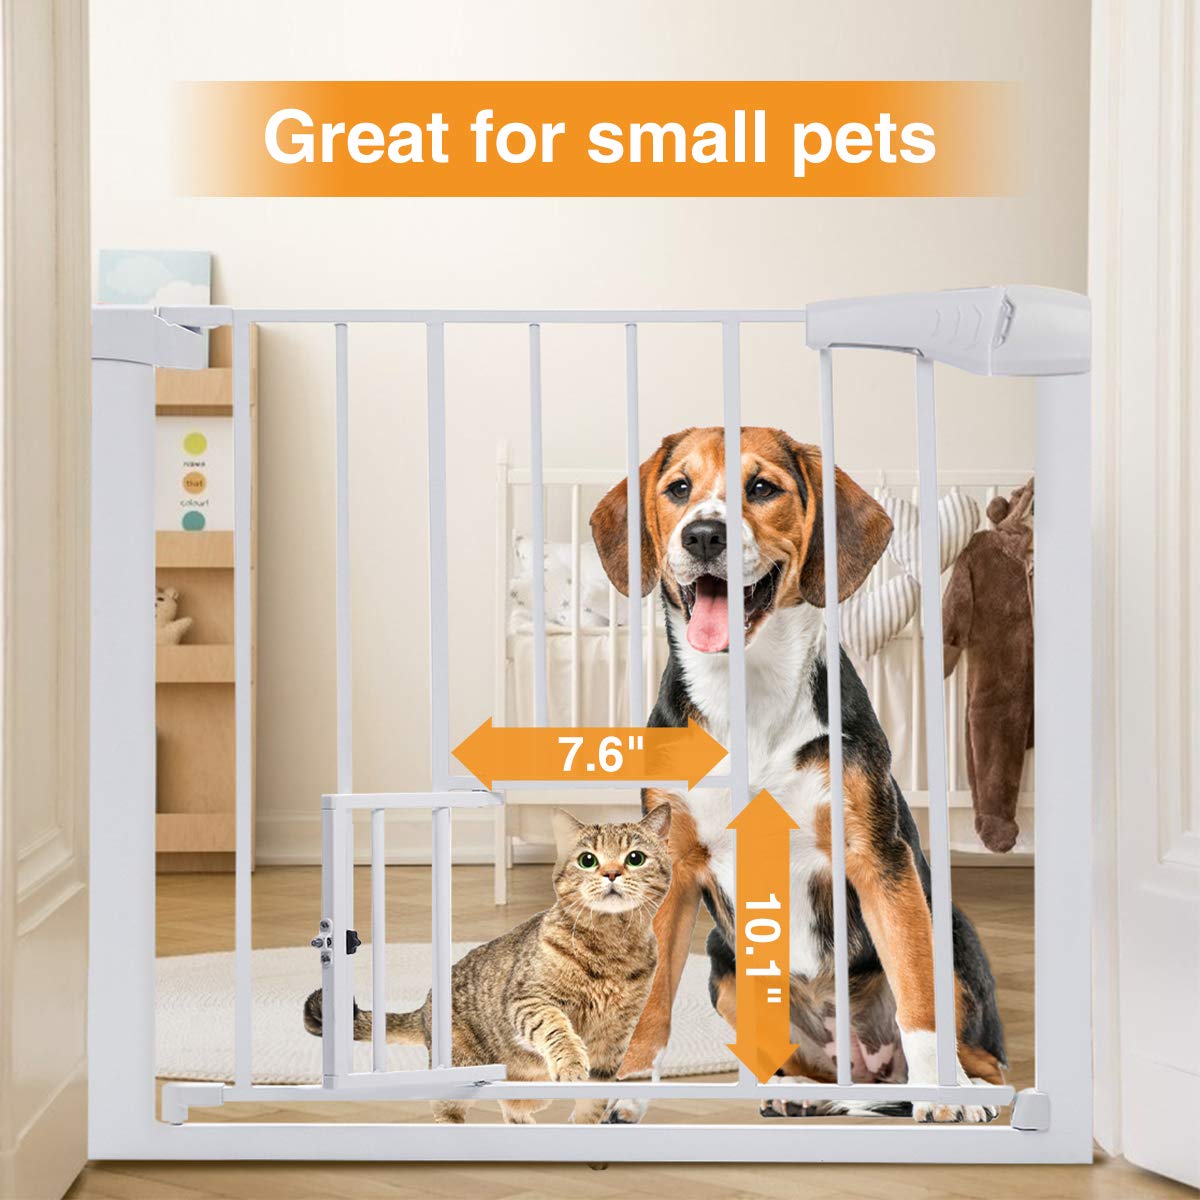 Comomy-Extra-Wide-Pet-Gate-for-Dog-Cat-Animal-Baby-Gate-Fence-Pens-with-Swing-Door-Kids-Play-Gate-30-1900433-1